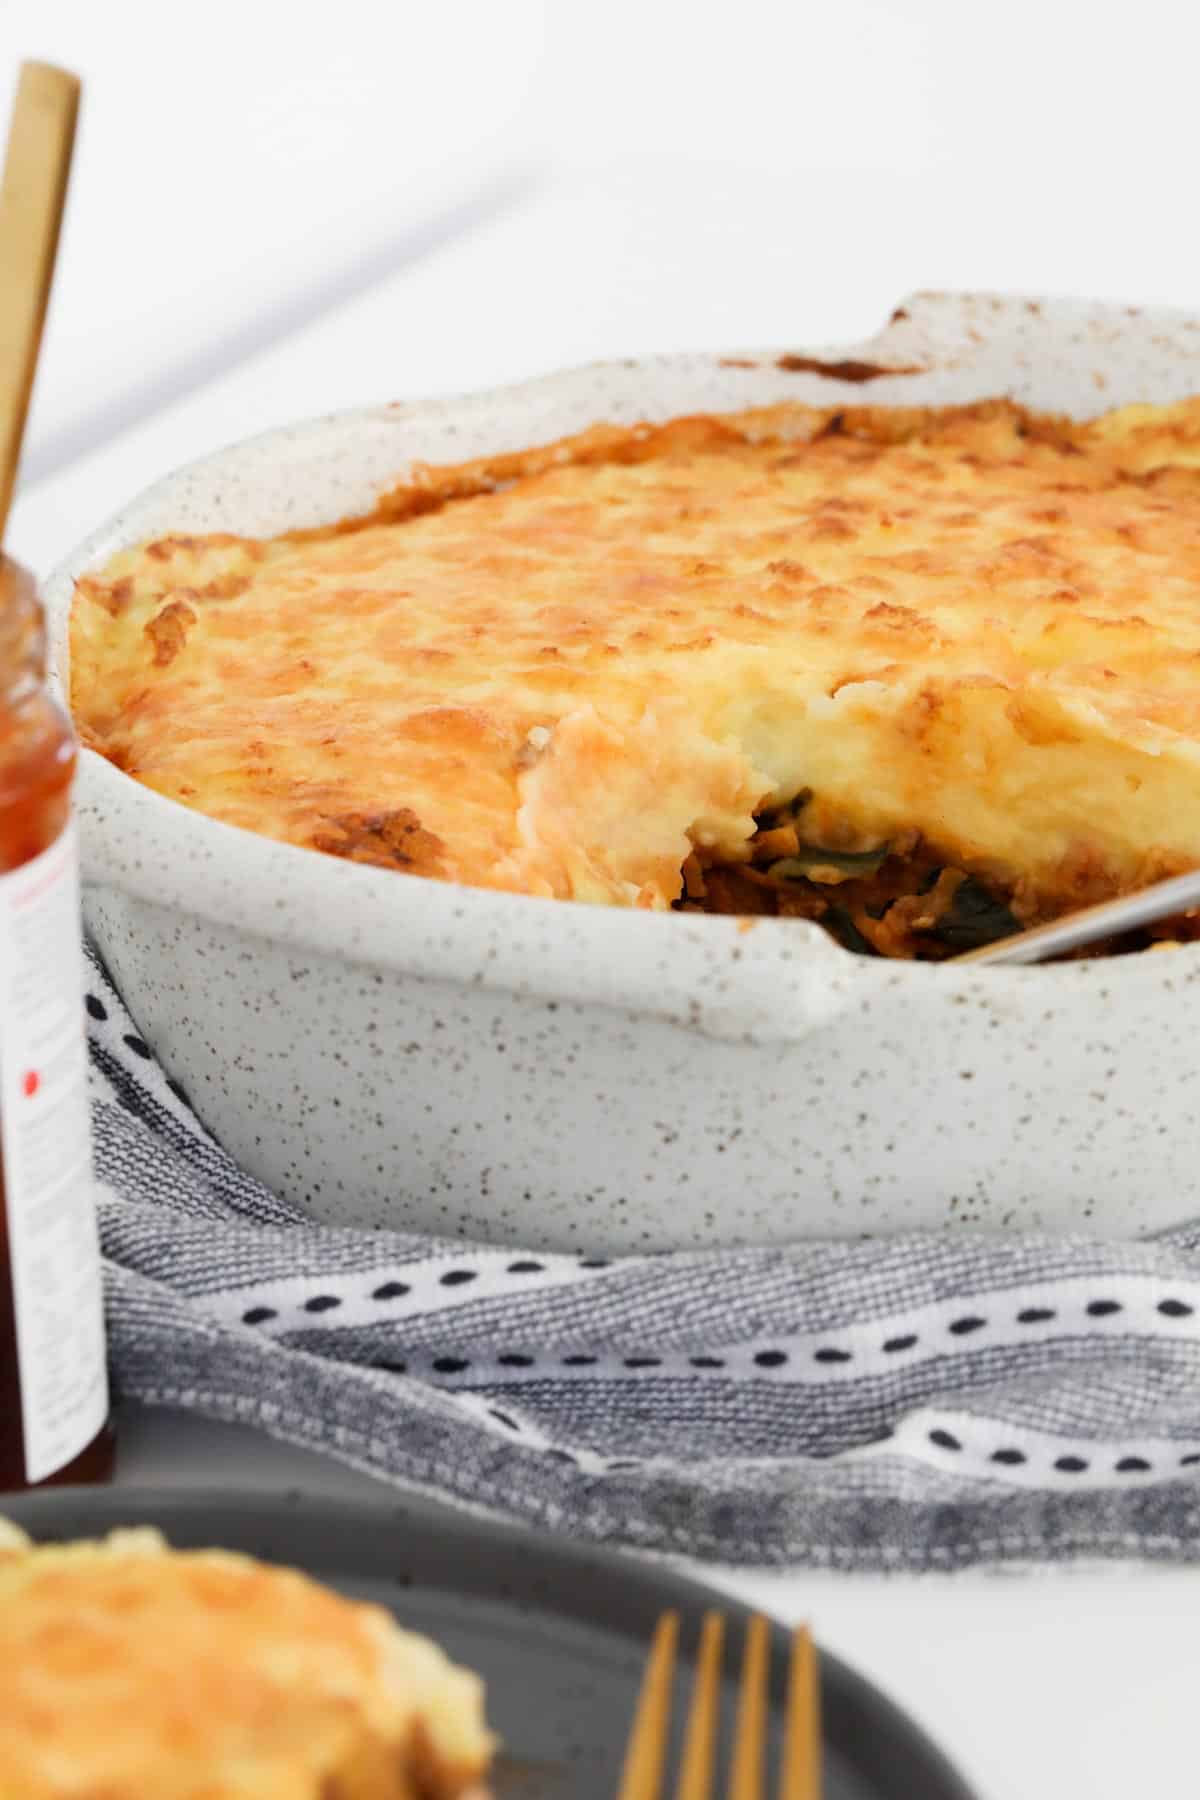 A spoon in a baking dish filled with beef and potato pie.